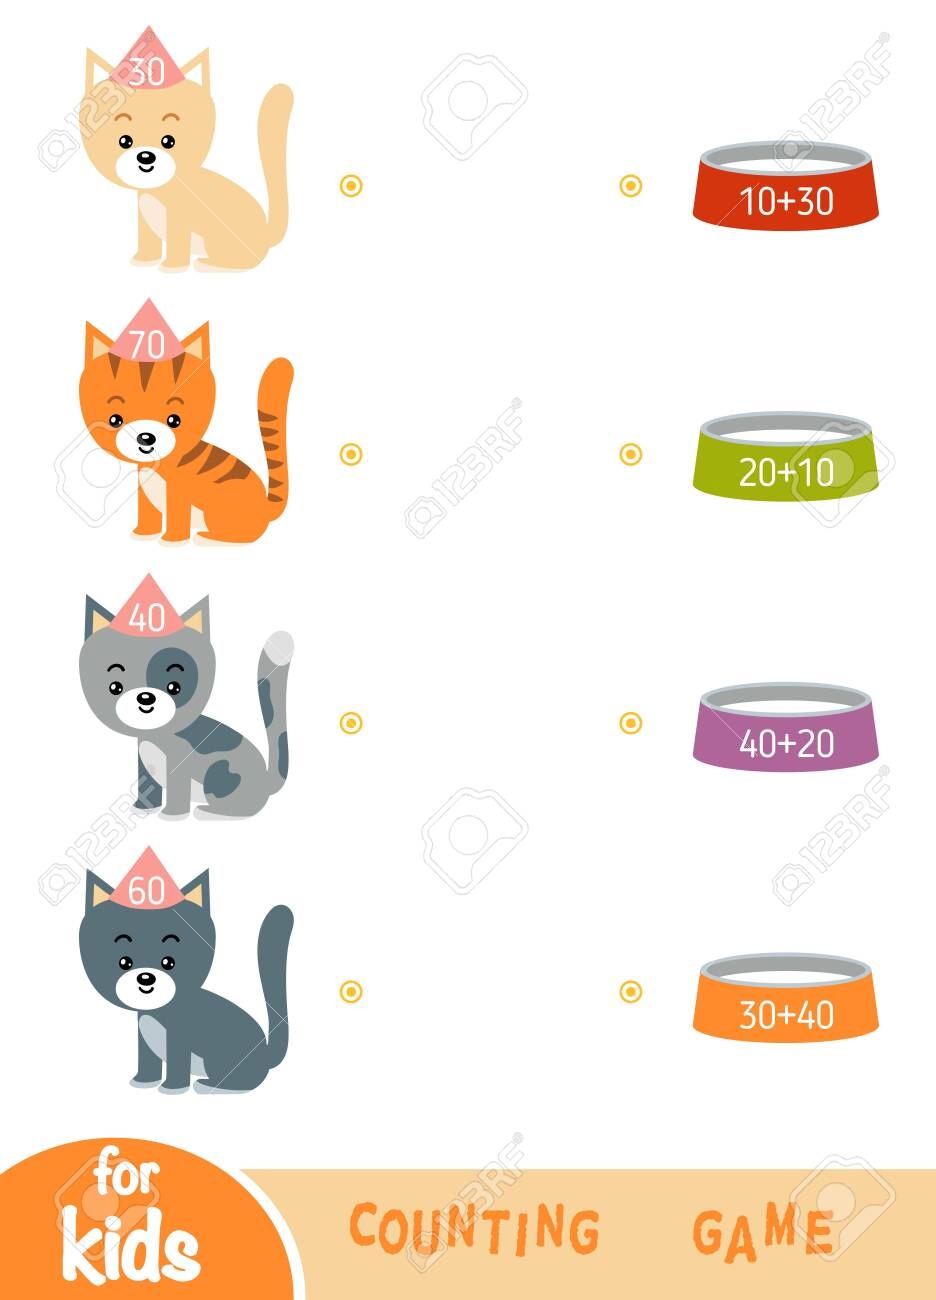 Counting Game For Preschool Children Educational A Mathematical Game Addition Worksheets Cats And Bowls With Milk Royalty Free SVG Cliparts Vectors And Stock Illustration Image 141240631 